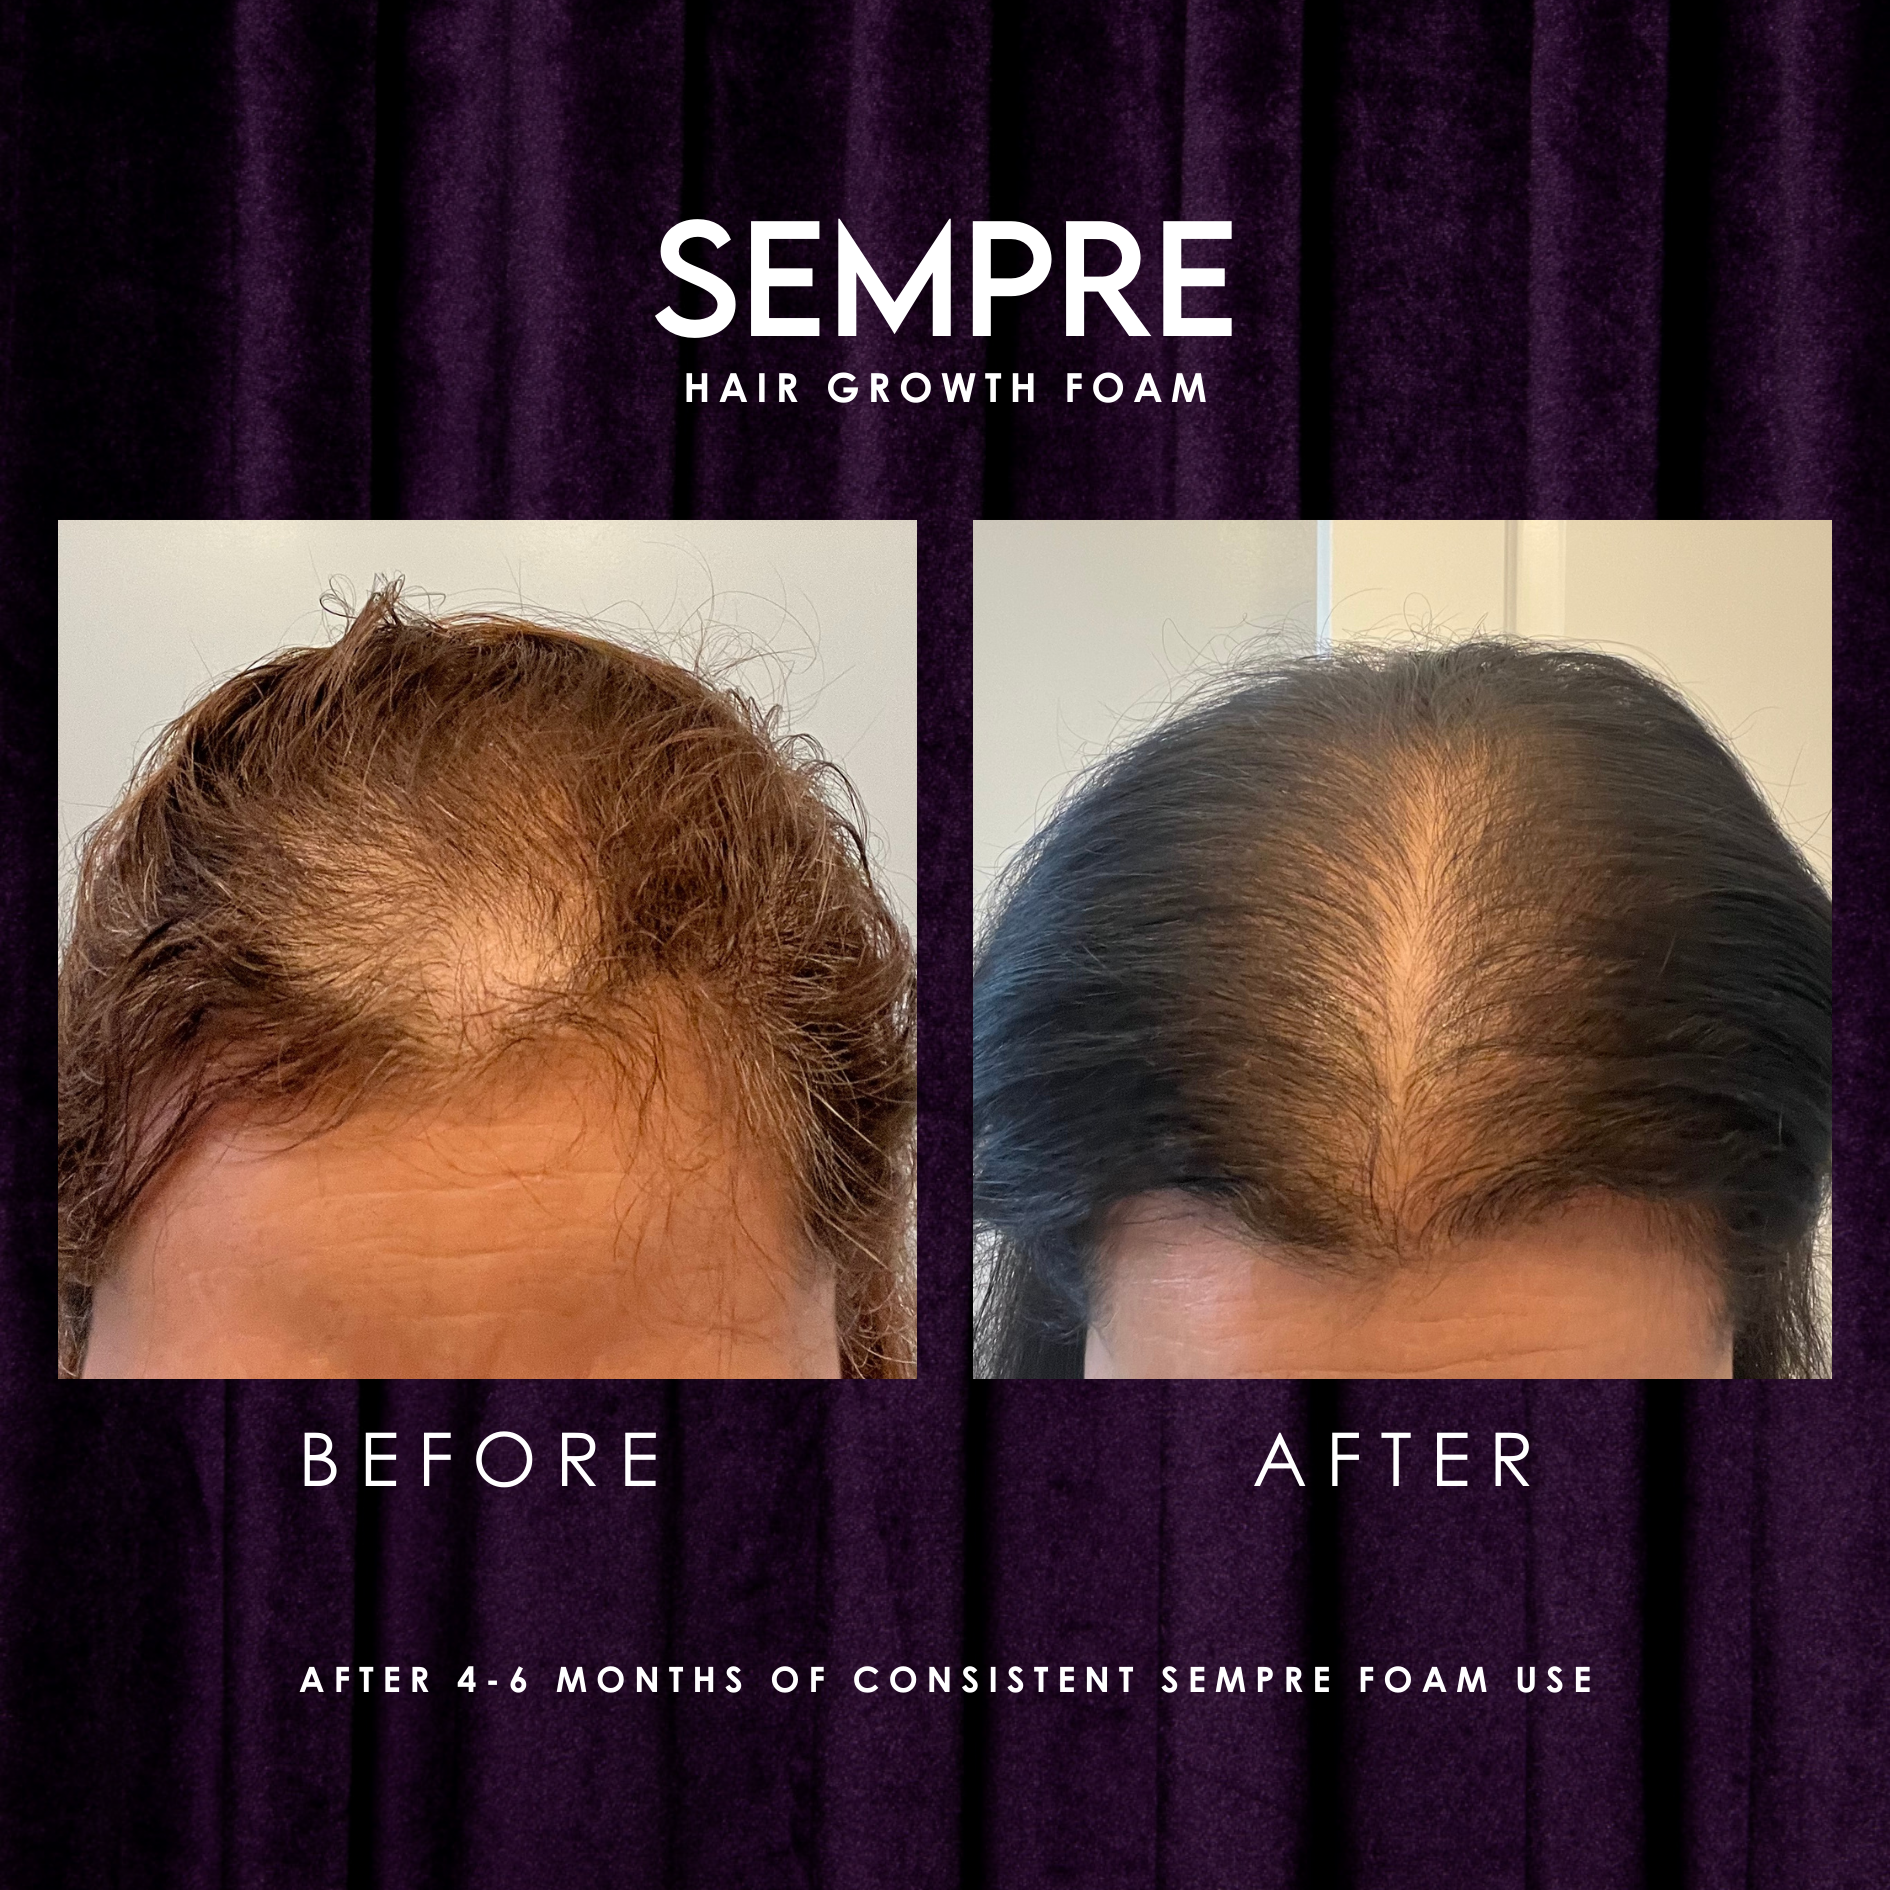 Sempre Growth Foam Before And After Result